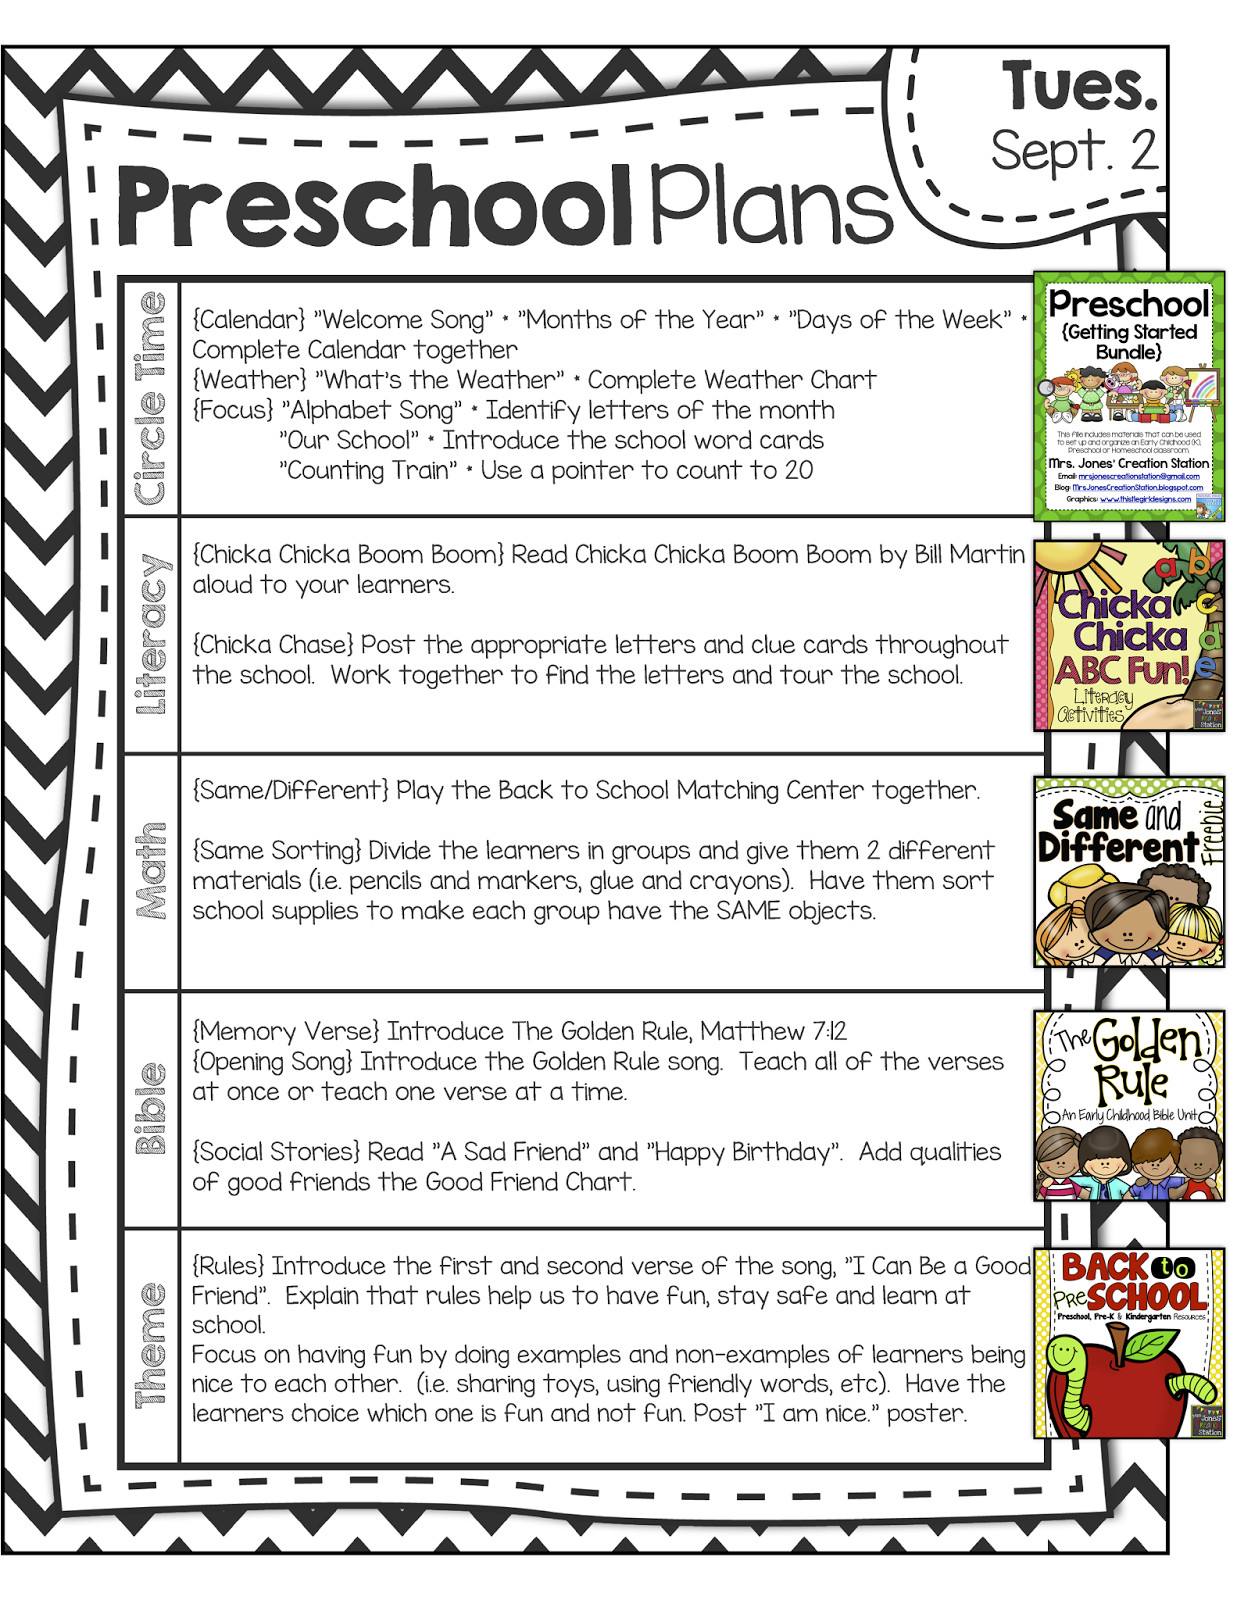 Pre K Lesson Plan Template Windows 10 Product Activation Keys All Versions